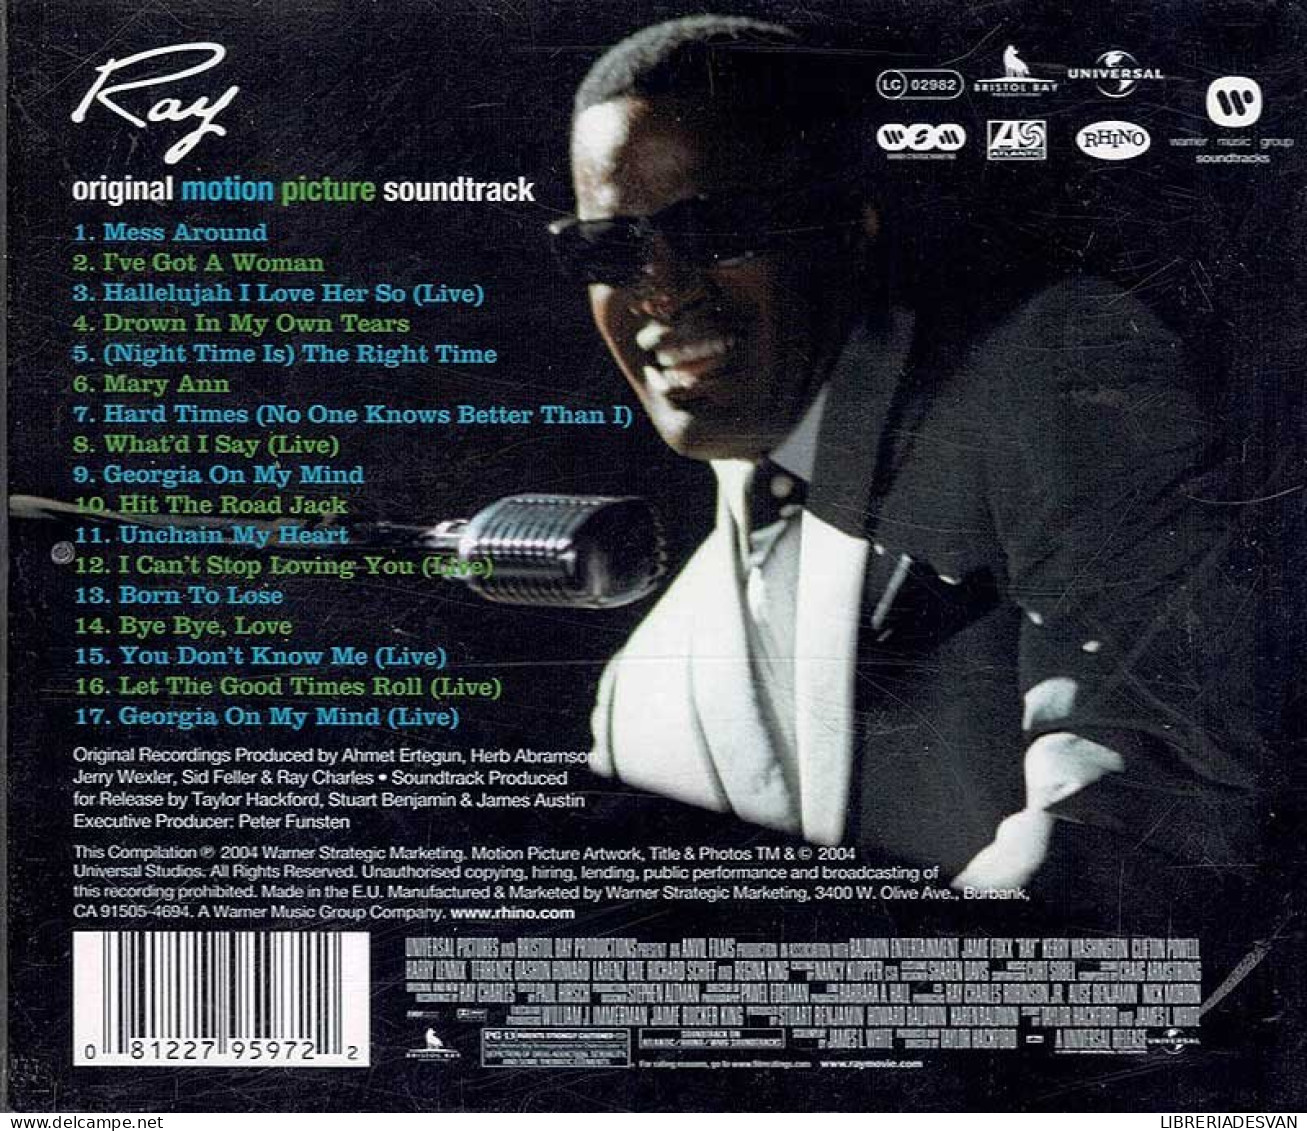 Ray Charles - Ray (Original Motion Picture Soundtrack). CD - Soundtracks, Film Music